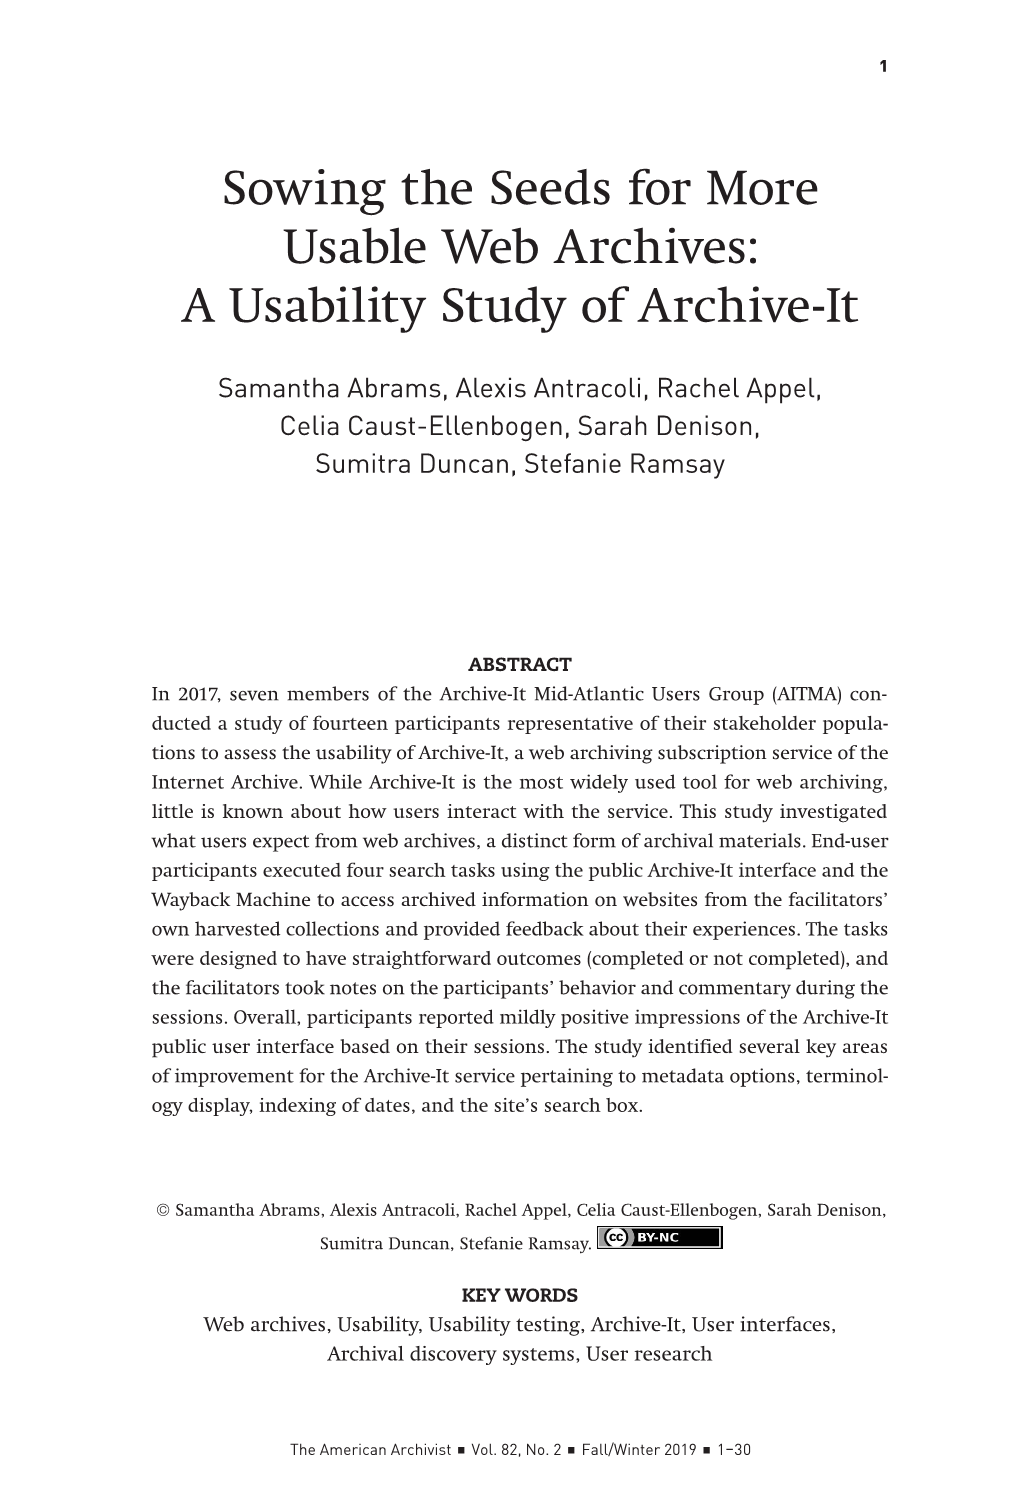 Sowing the Seeds for More Usable Web Archives: a Usability Study of Archive-It